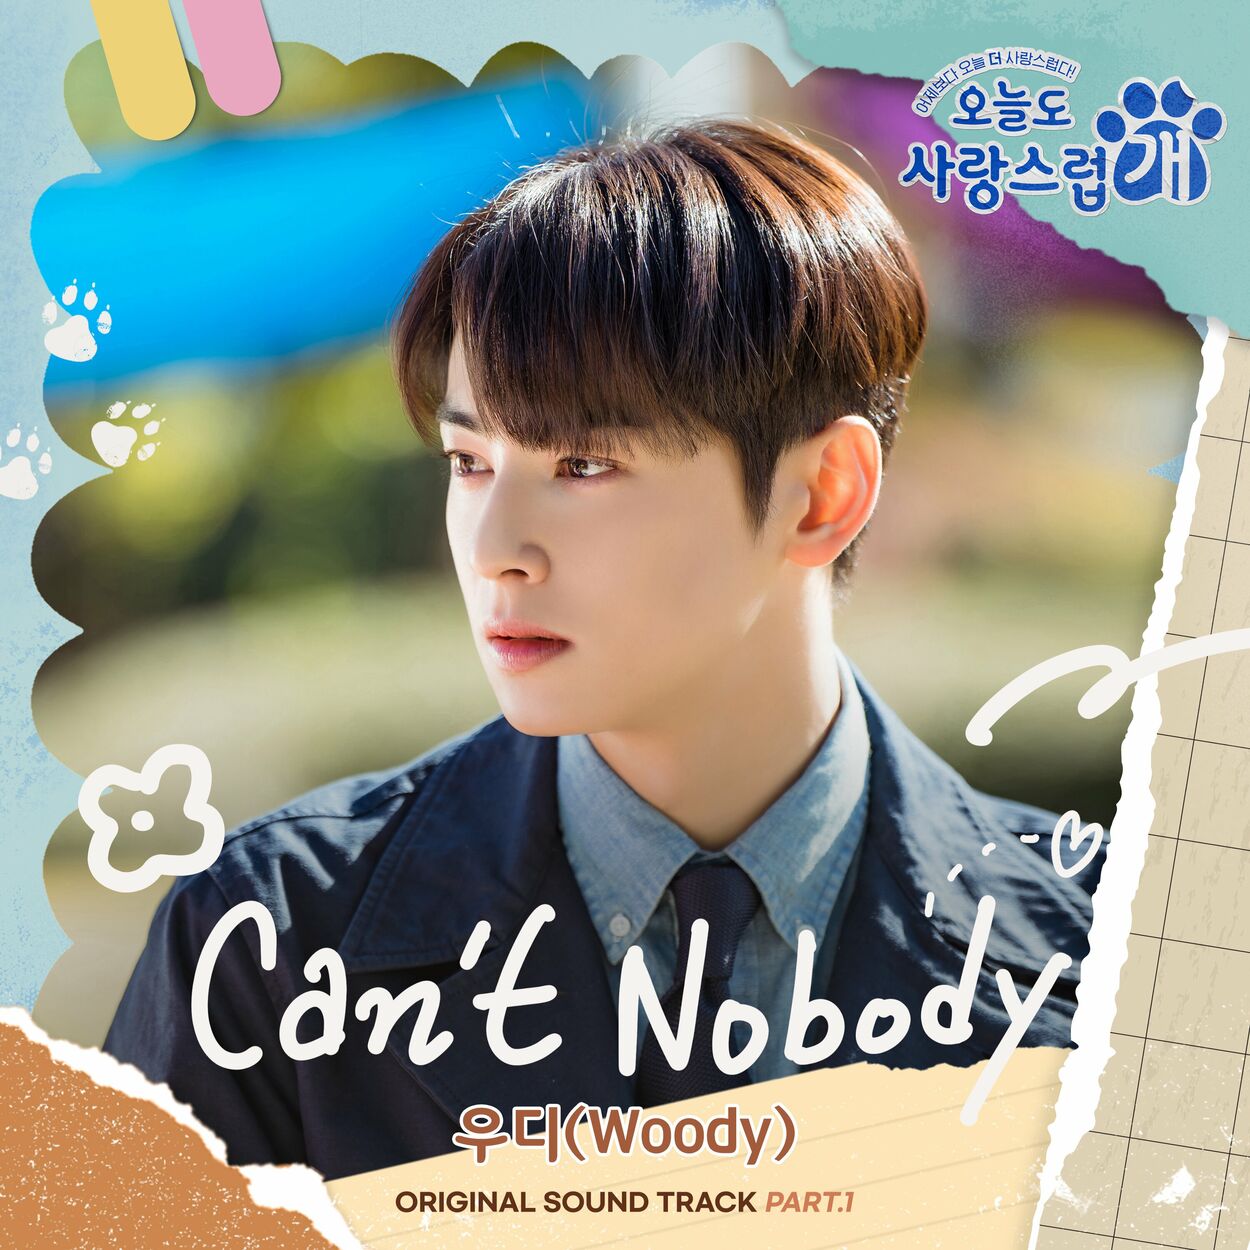 Woody – Can’t Nobody (From “A Good Day to be a Dog” Original Television Sountrack, Pt. 1)